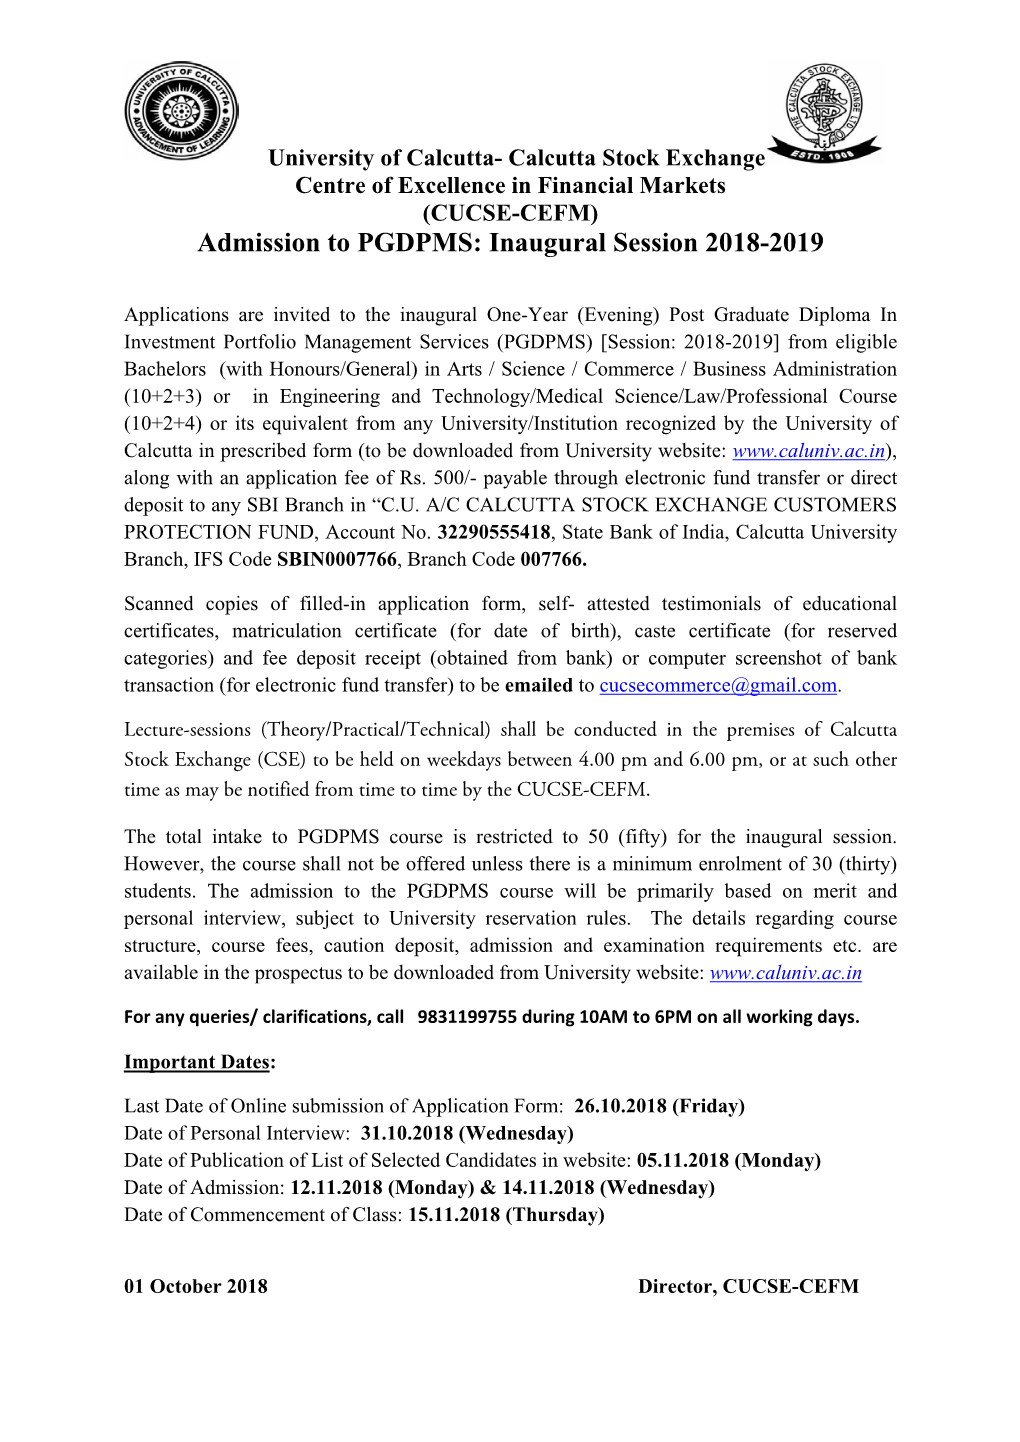 Admission to PGDPMS: Inaugural Session 2018-2019